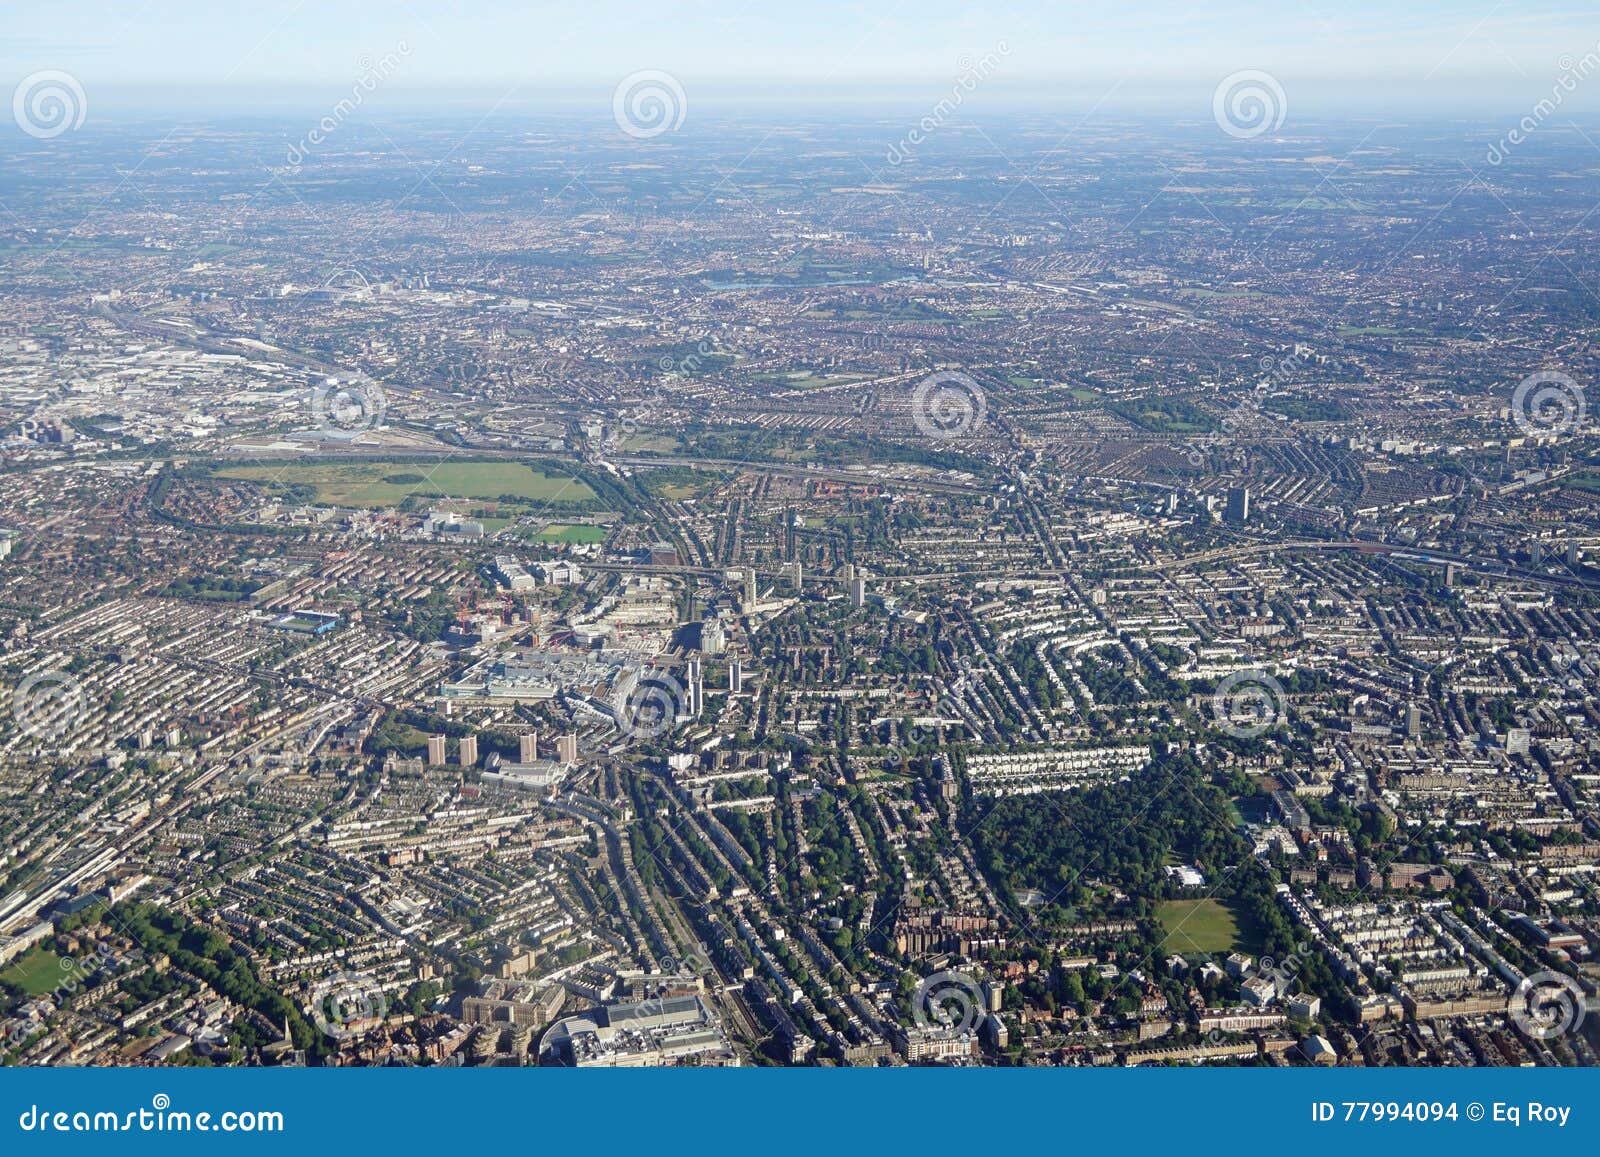 aerial view of central london